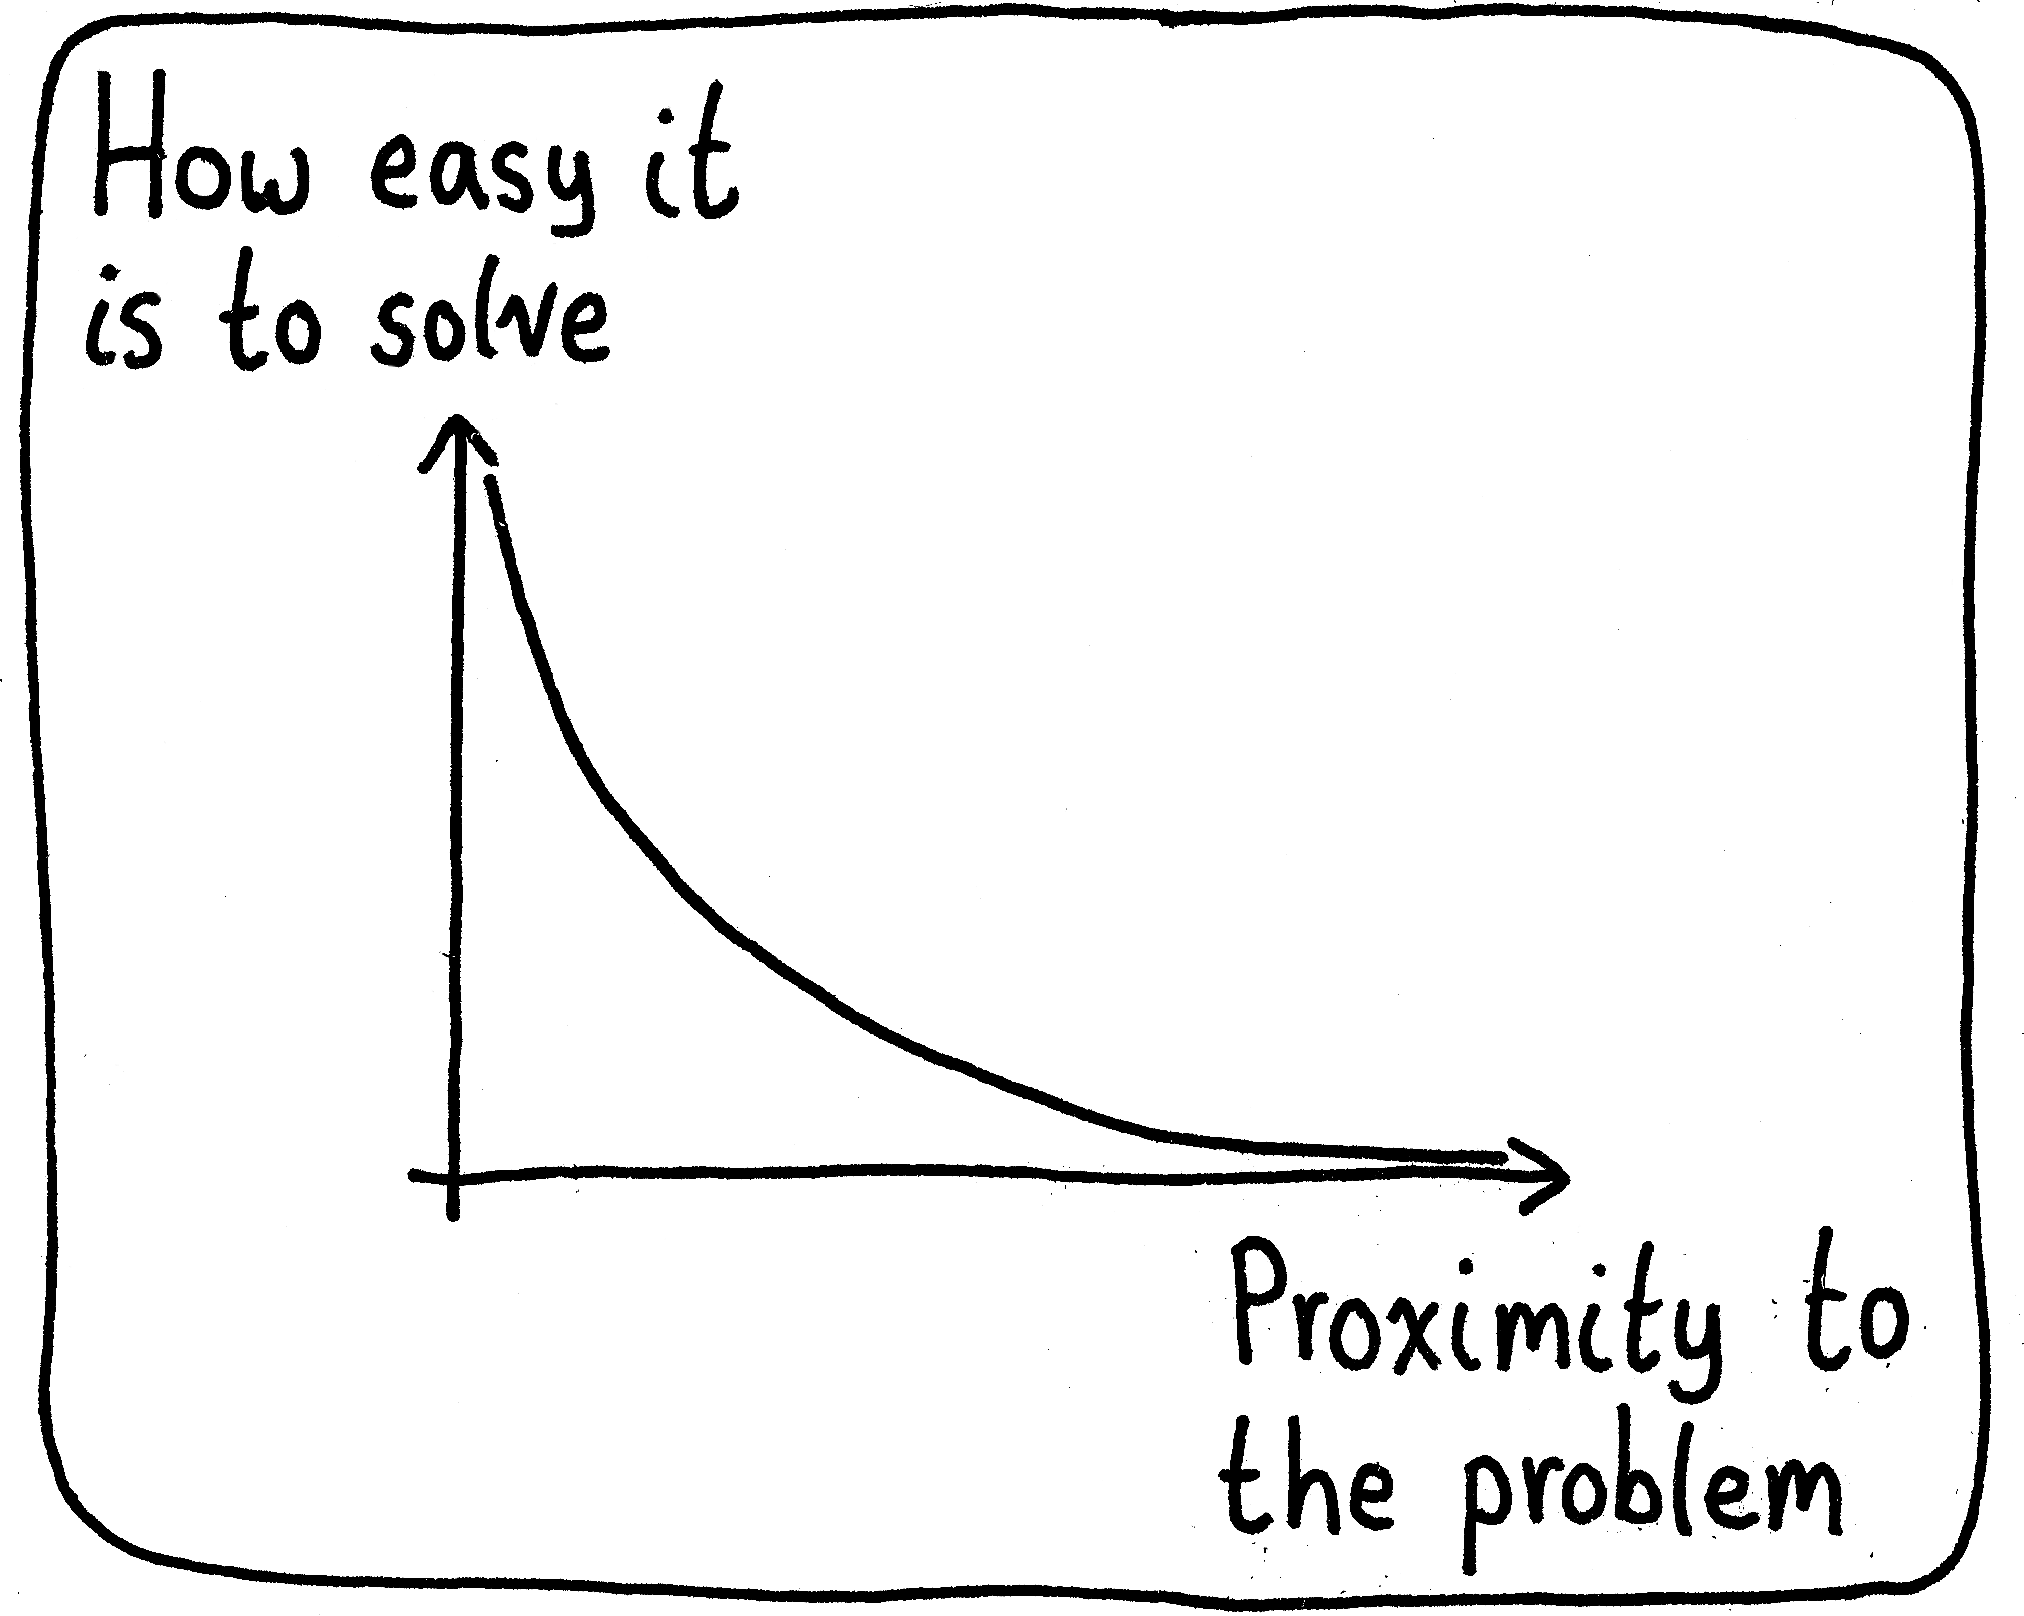 A graph of "How easy it is to solve" versus "Proximity to the problem". It's an inverse relationship, with it being harder to solve the problem when it's closer to you.